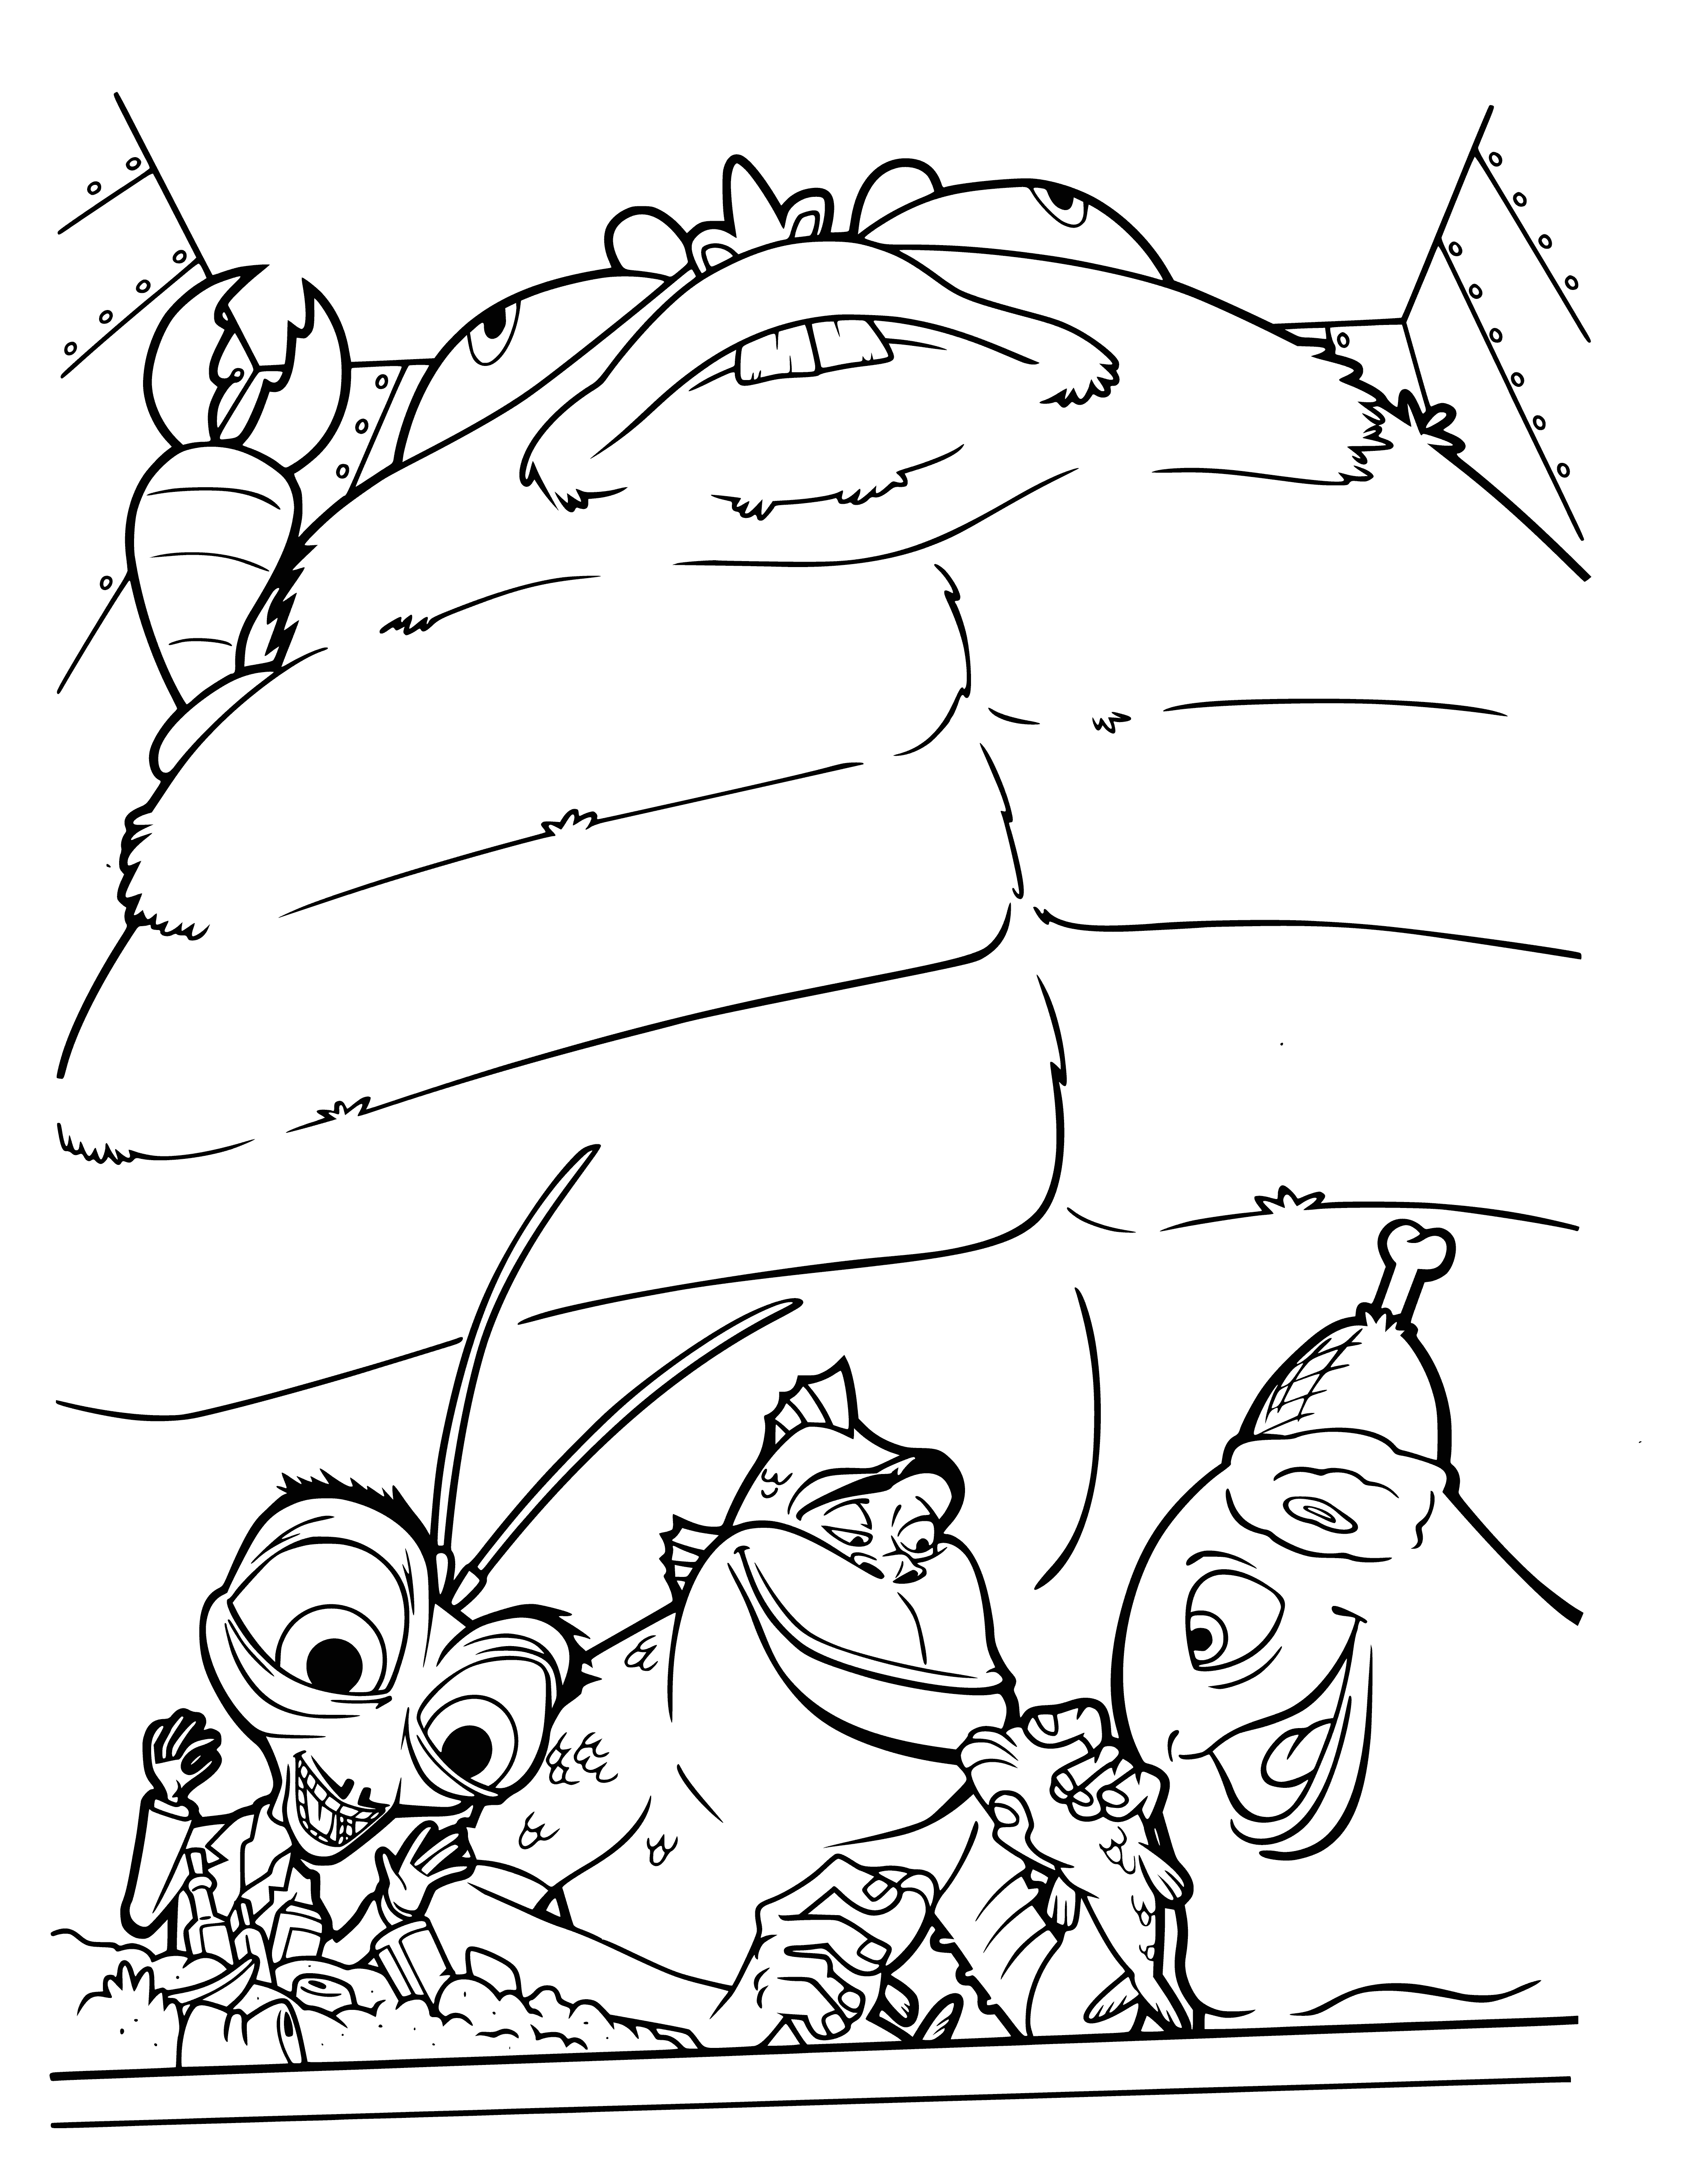 Monster team coloring page